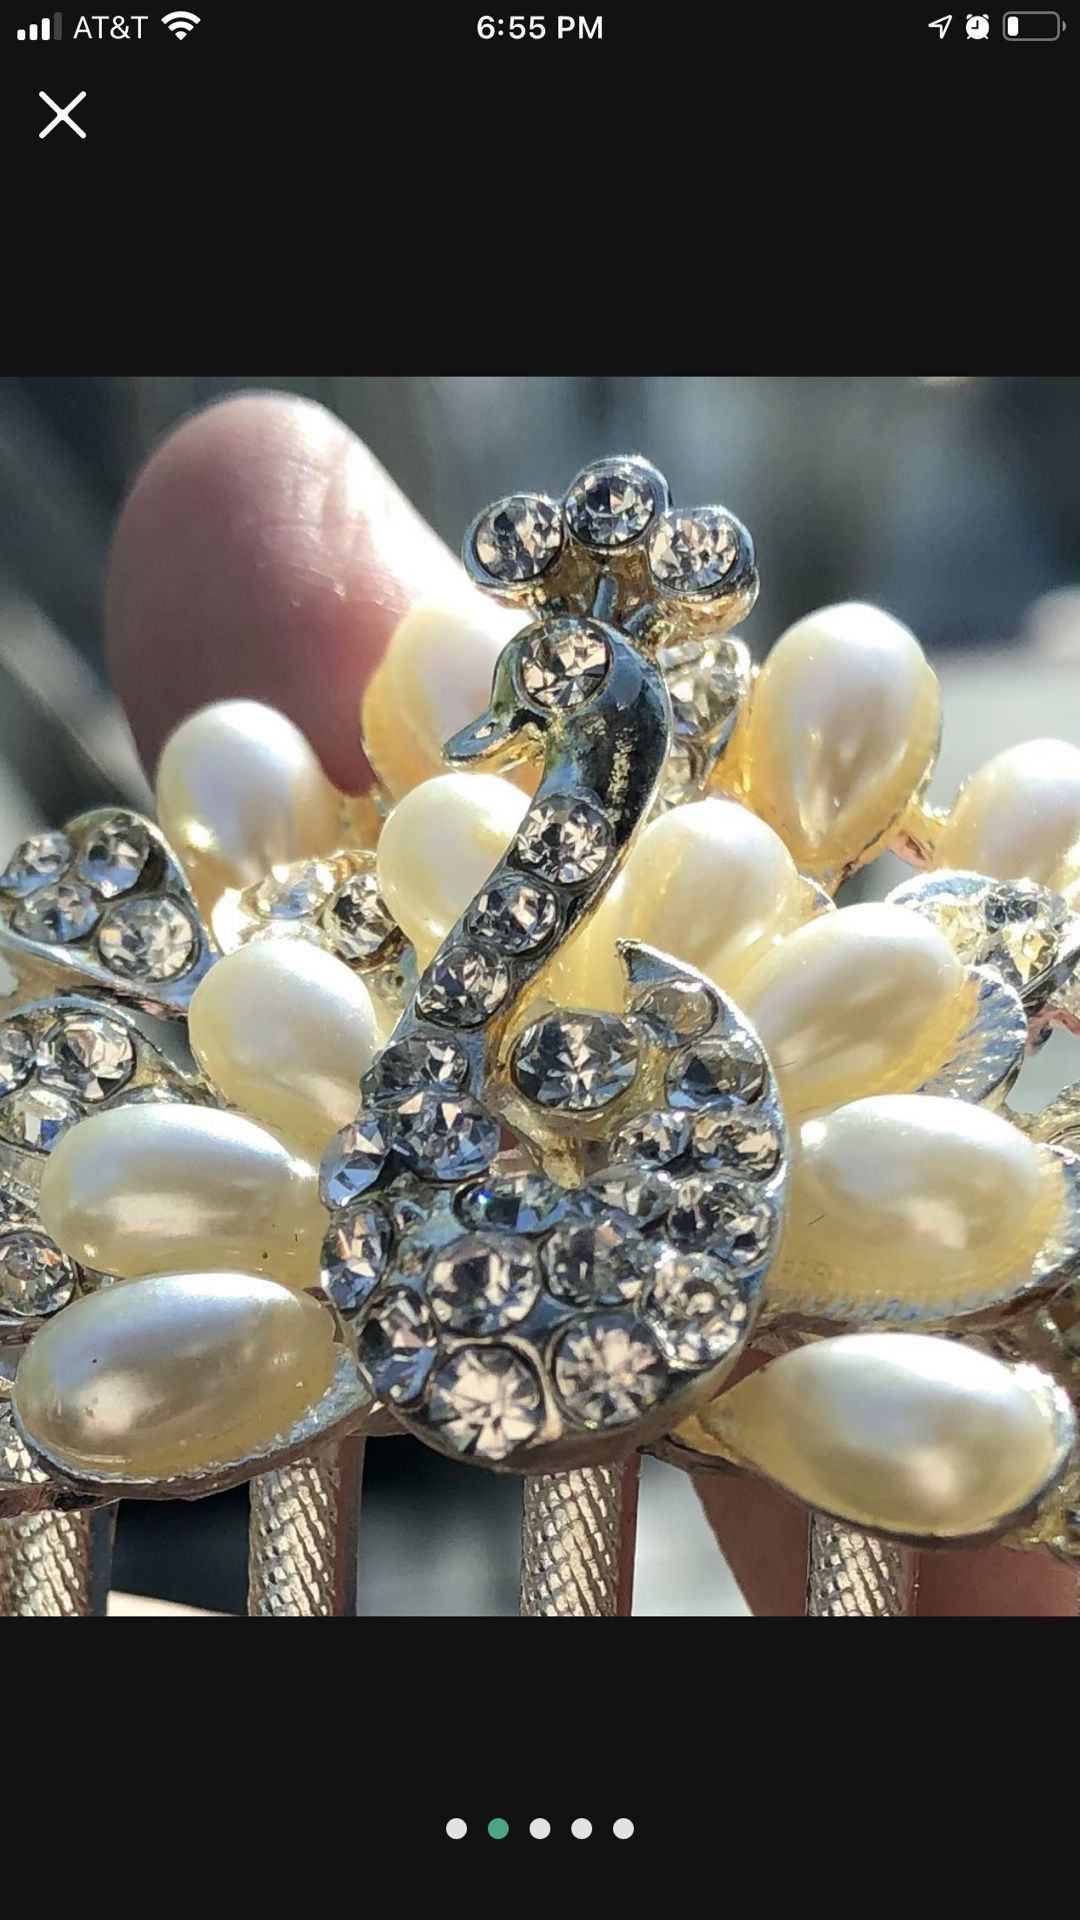 3 Inch Wide Ornate Hair Comb Faux Pearls Rhinestones Silver Tone Peacock Lovely Wedding Updo 